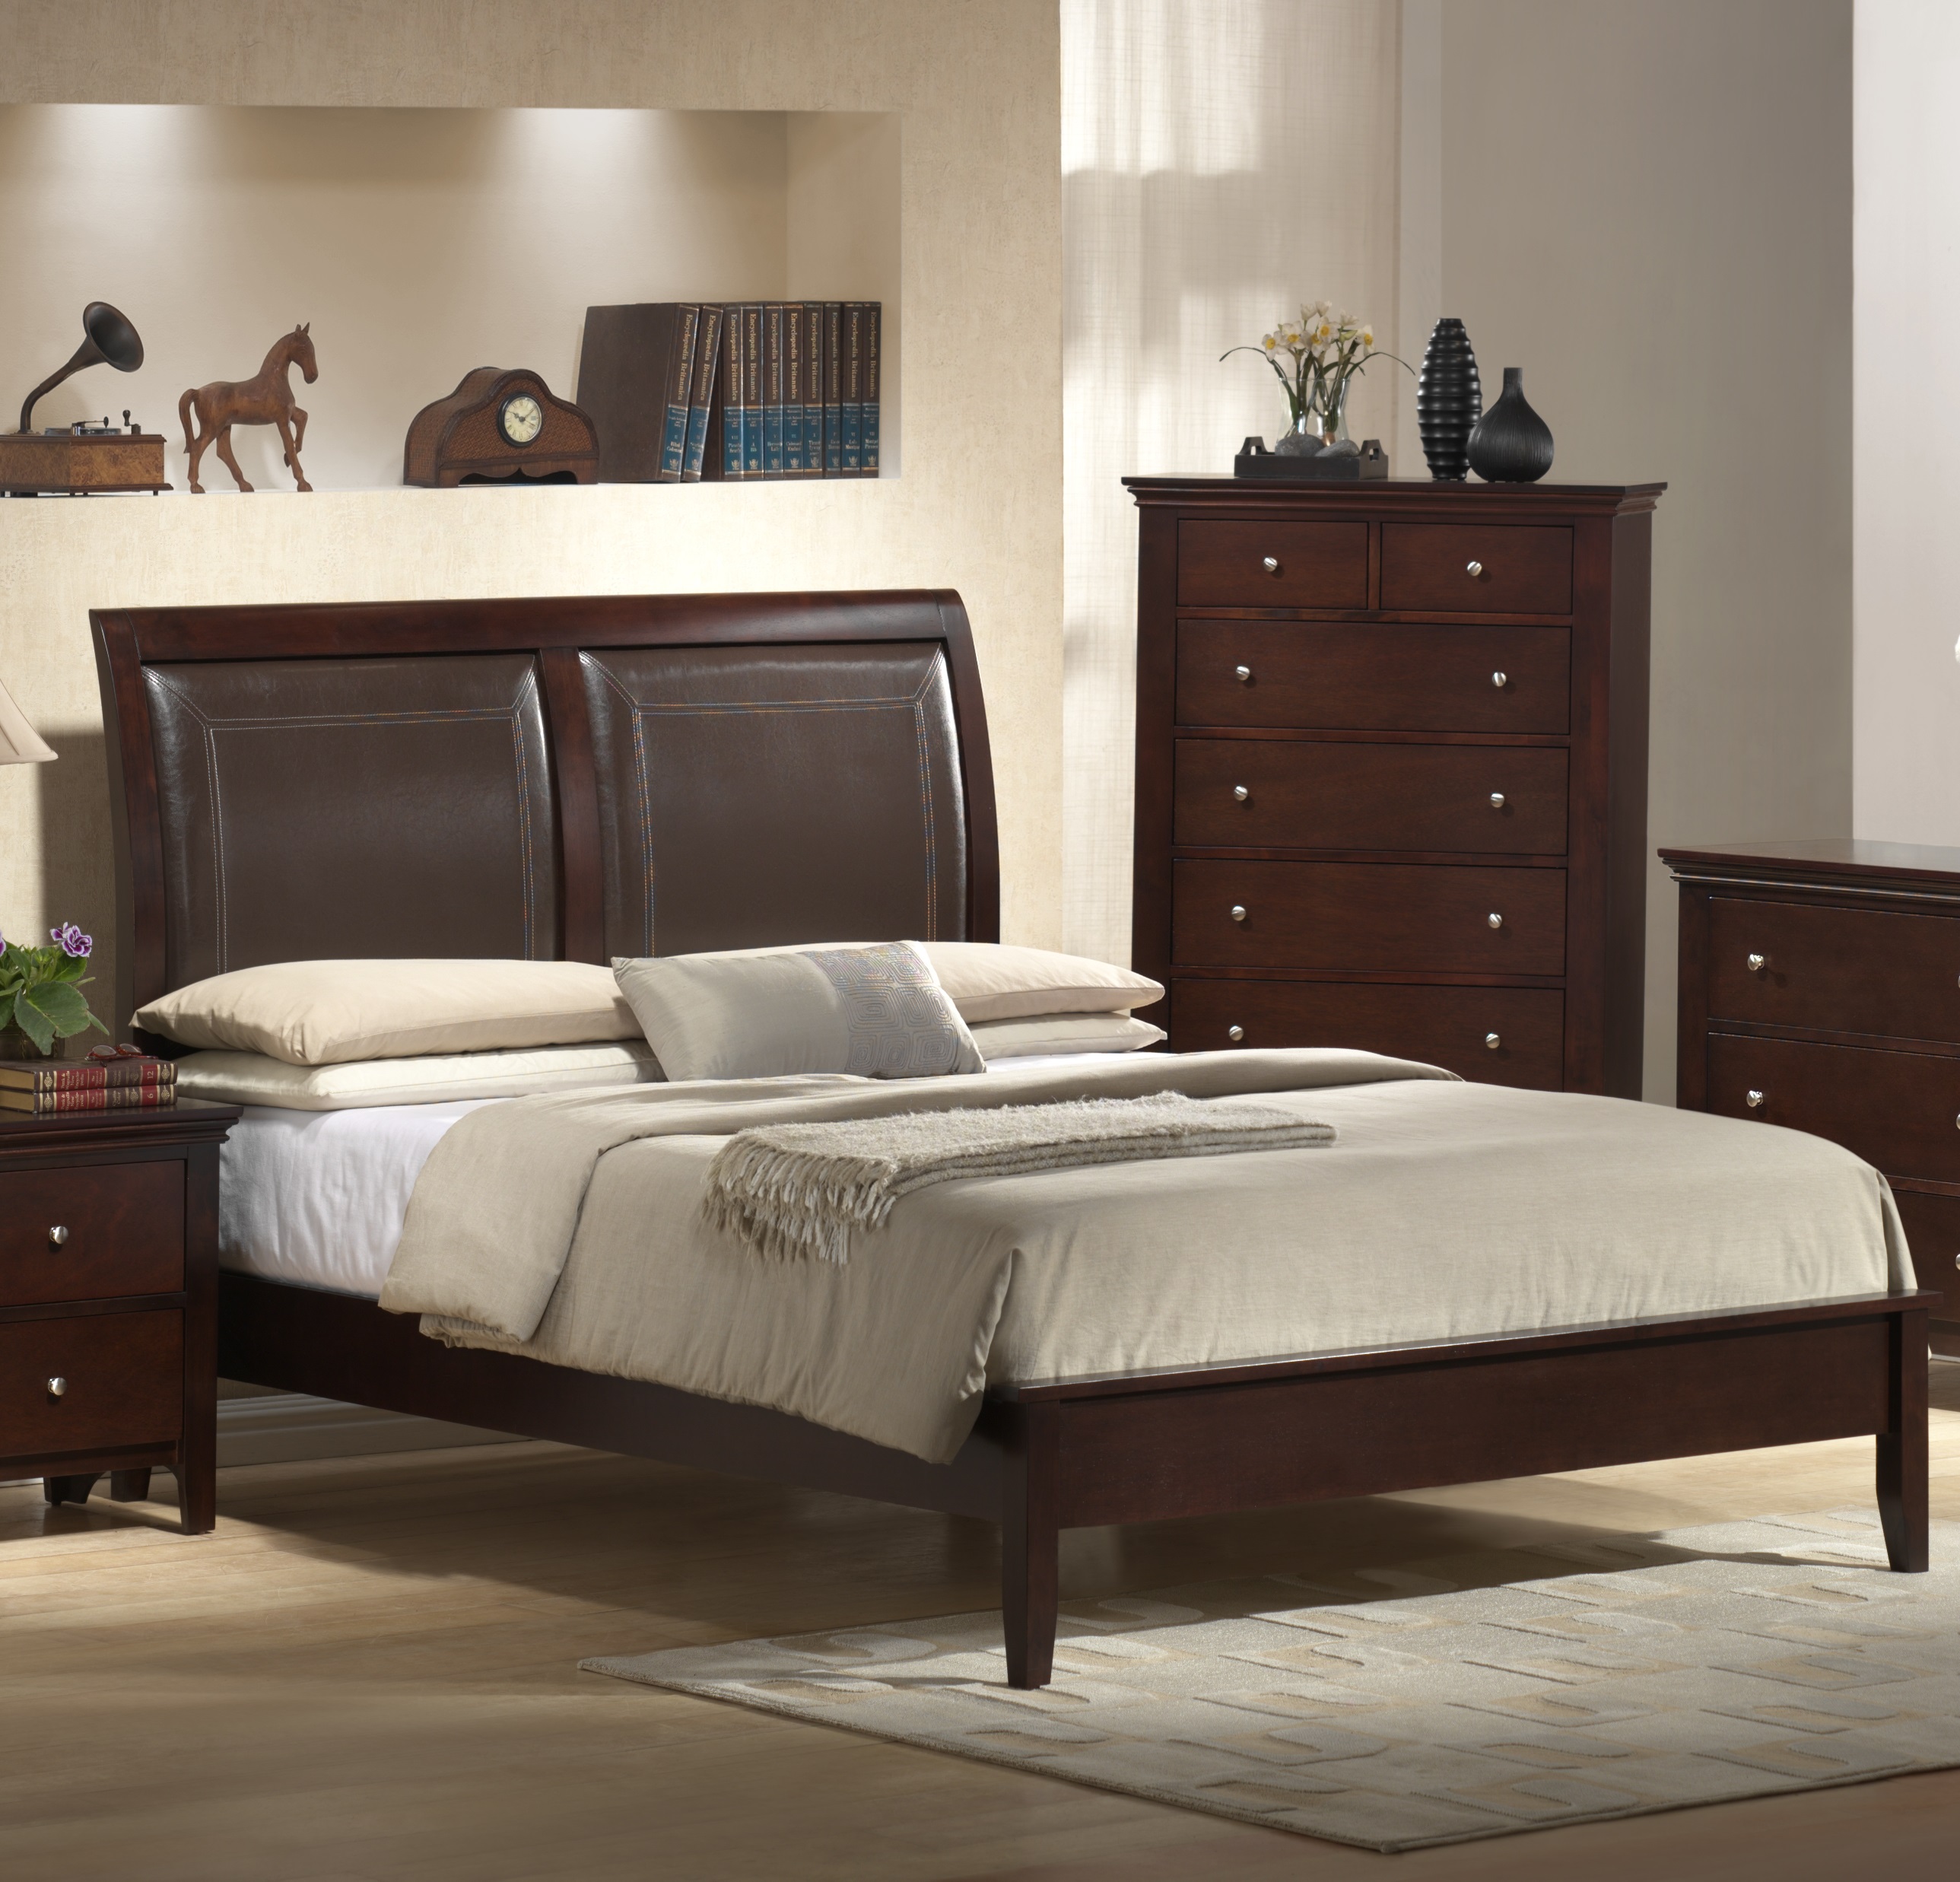 Furnituremaxx Charmel King Size Solid Wood Construction & Leather Padded Bed   Cherry Finish & Low Footboard